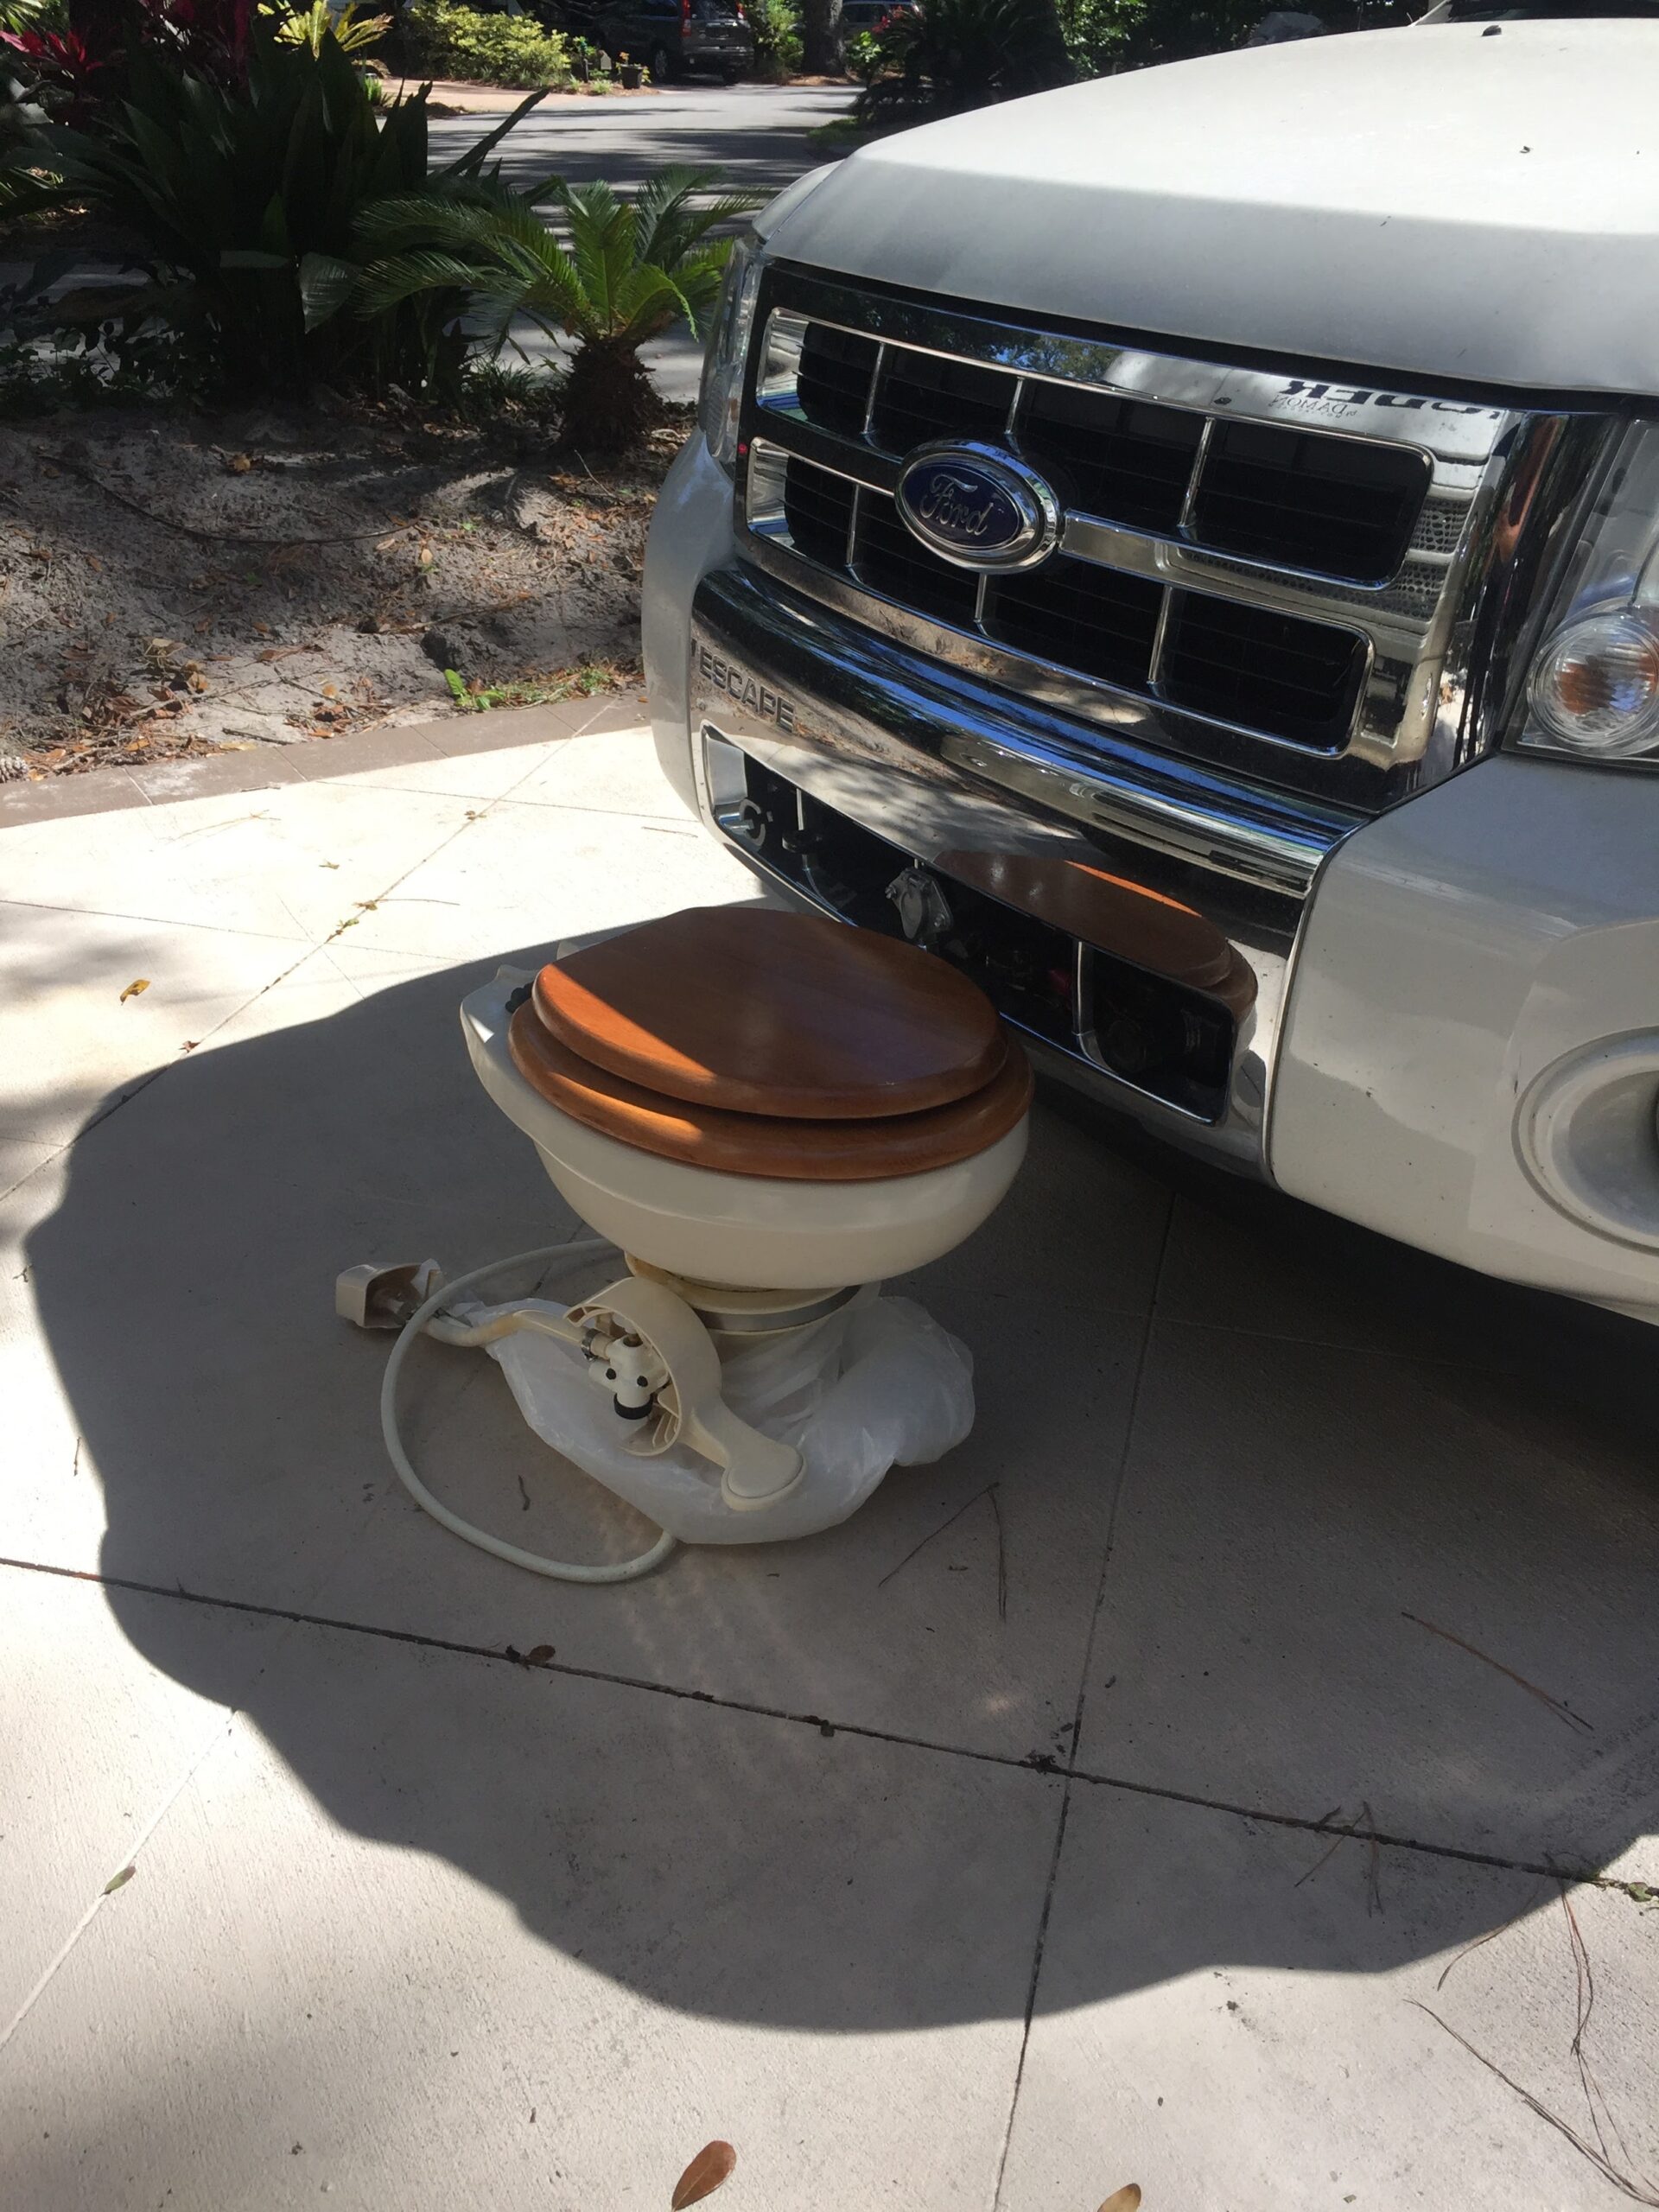 Toilet replacement while parked in Hilton Head. One of many fixes done on the road.